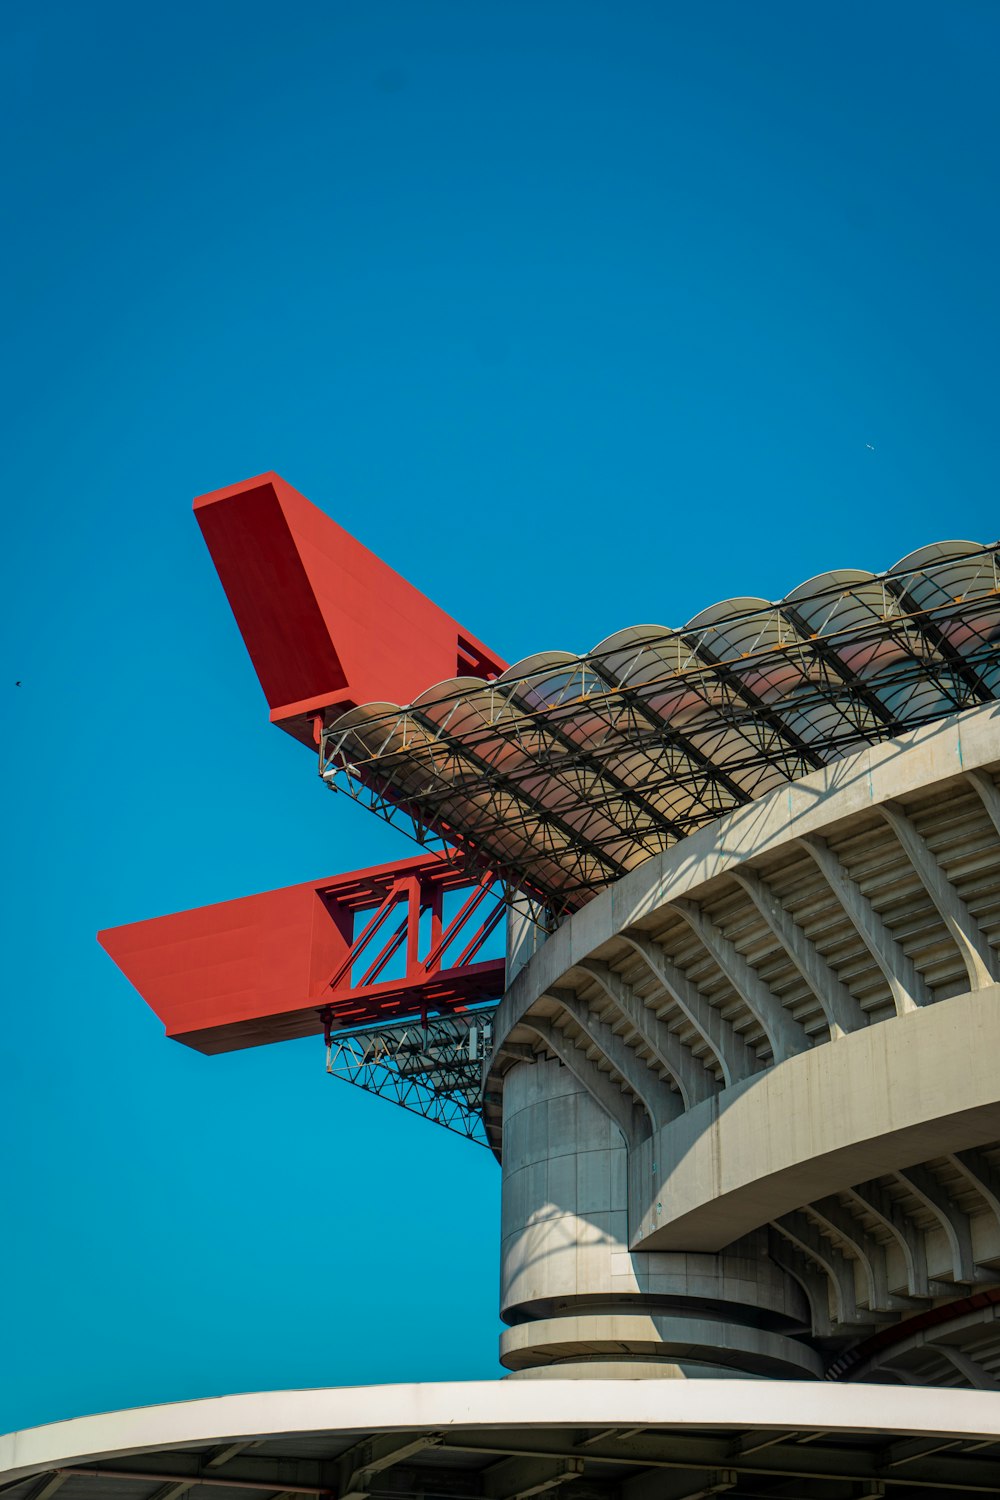 a red airplane is flying over a stadium